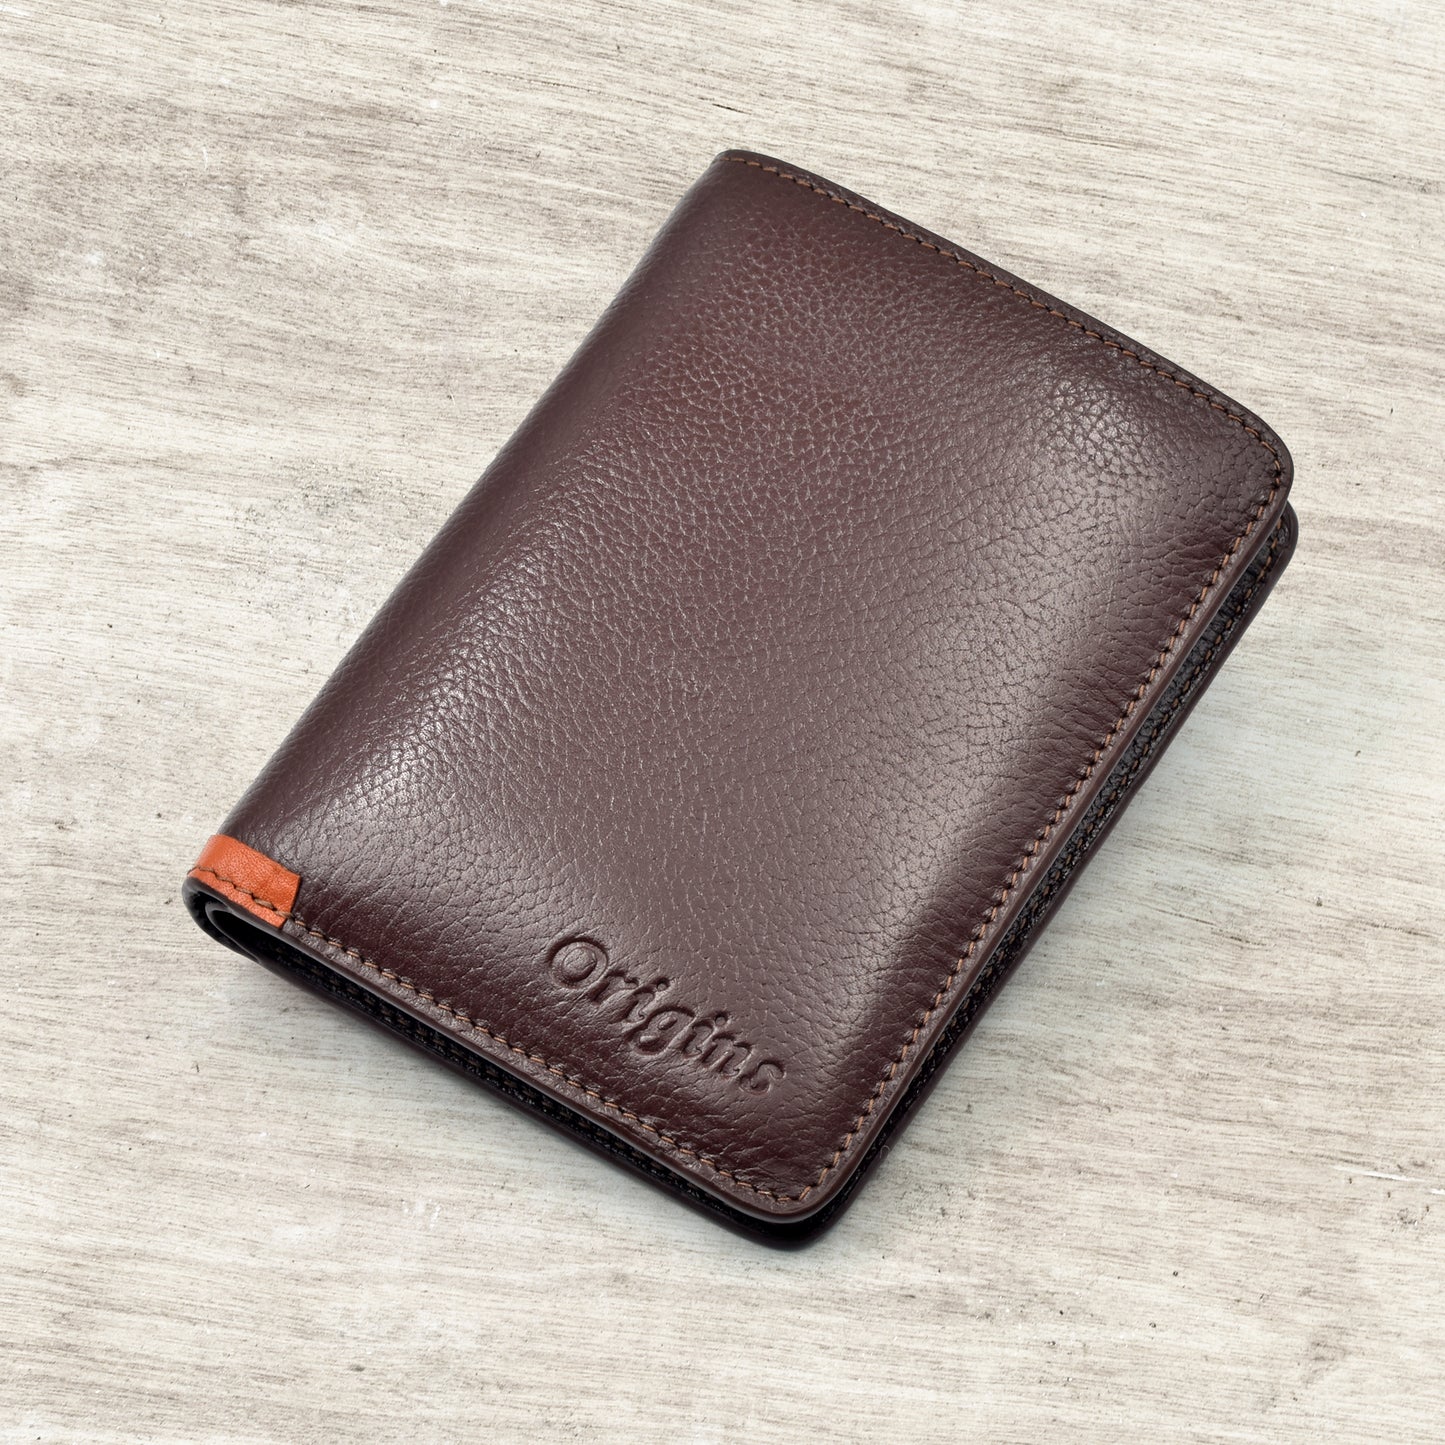 Premium Quality Leather Wallet for Men | ORGN Wallet 21